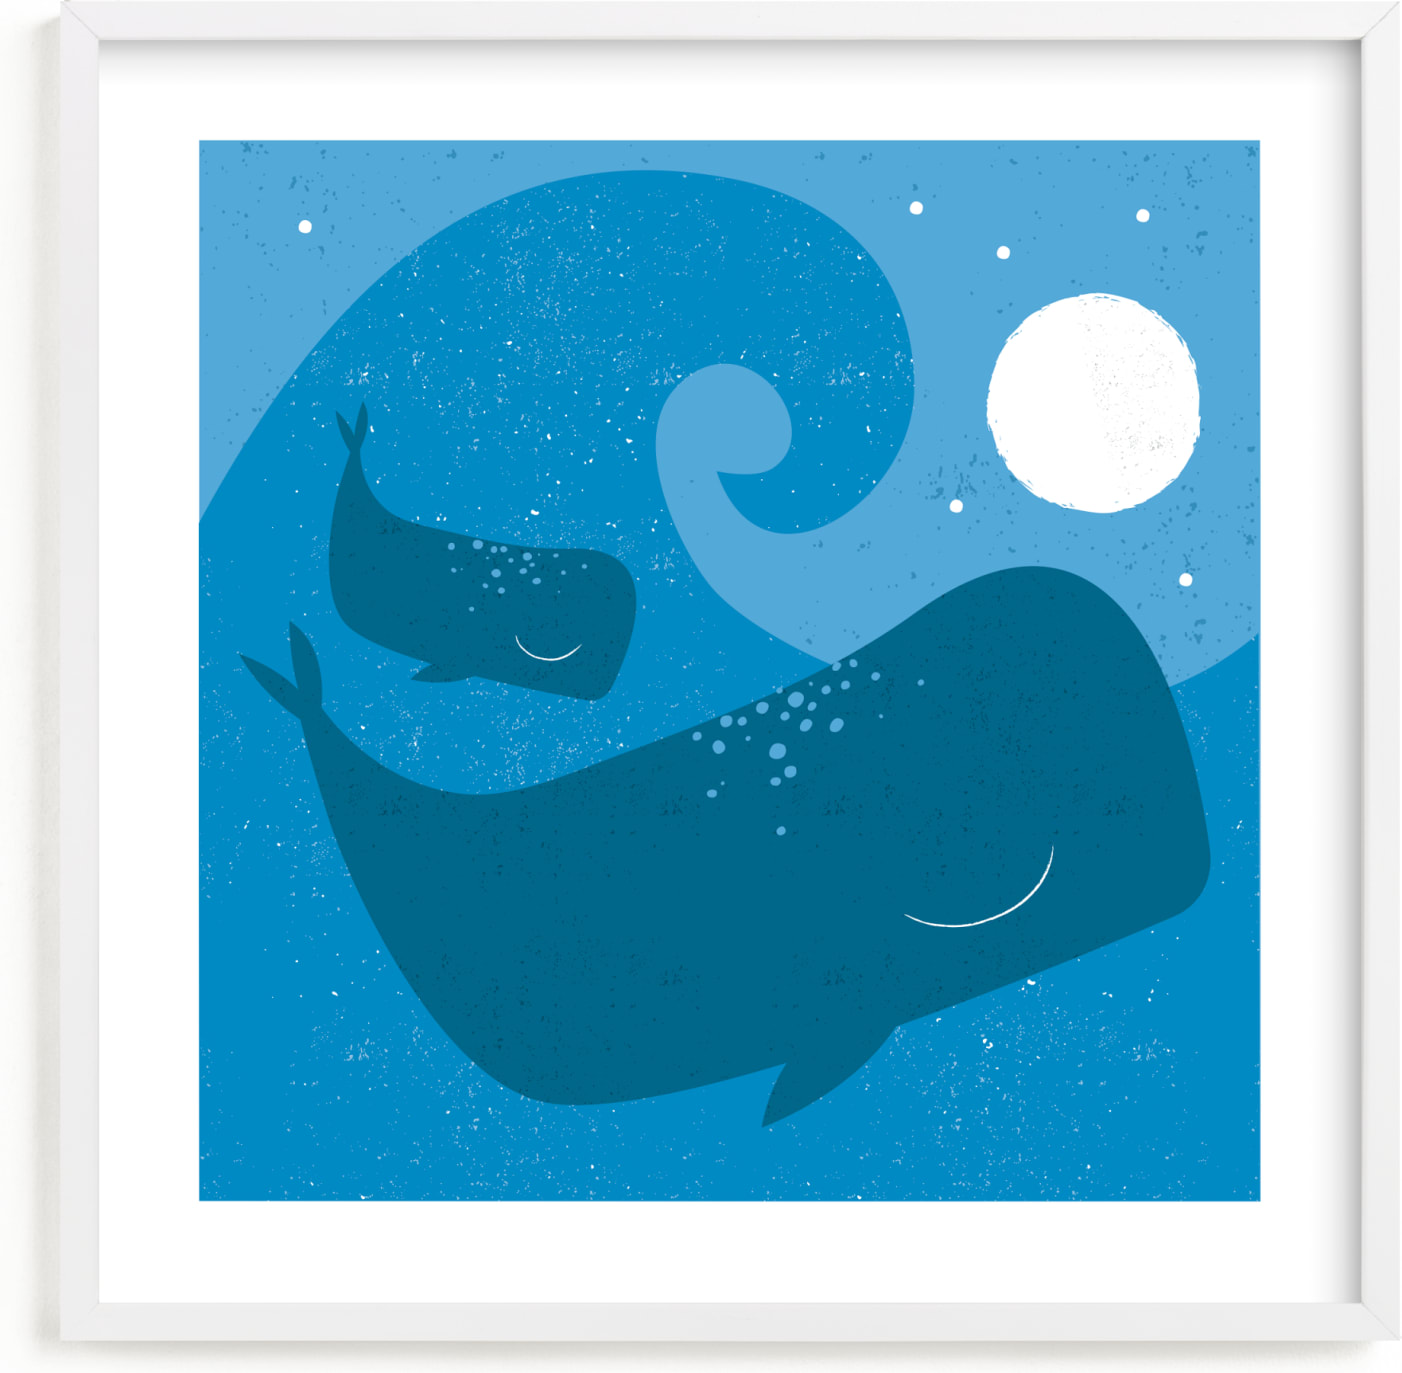 This is a blue kids wall art by Angela Thompson called midnight splash.